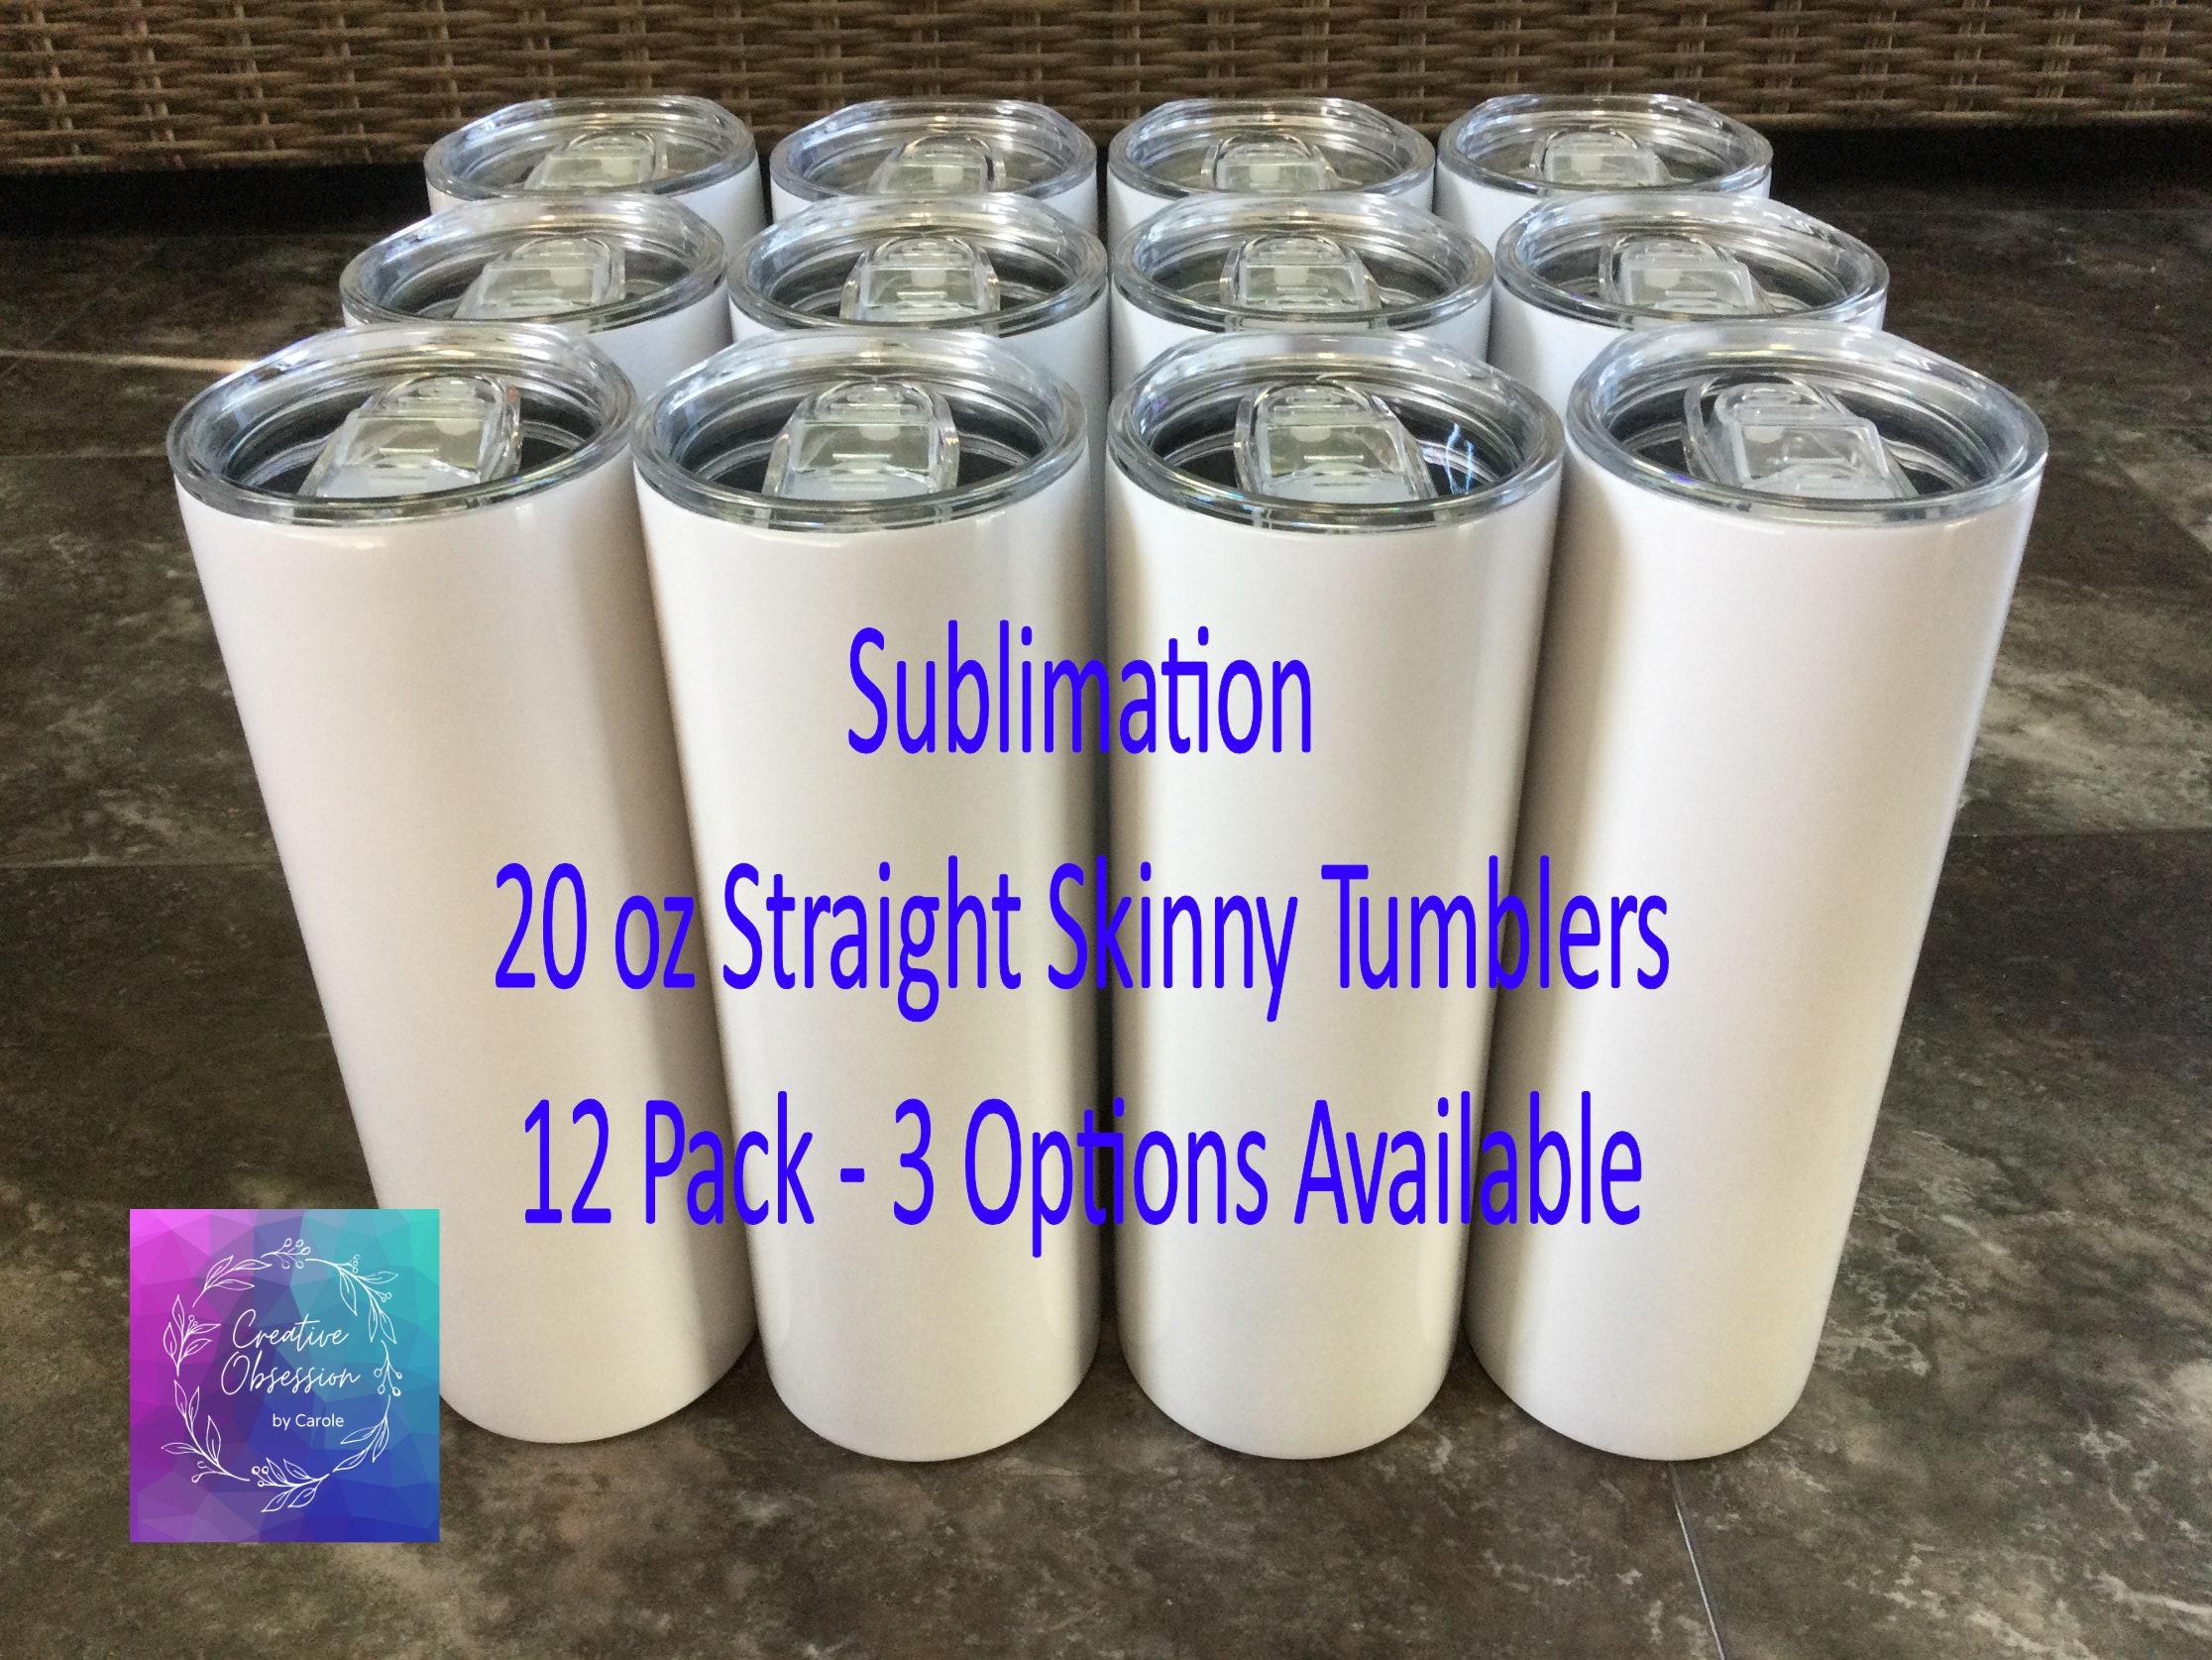 20 Pack of 20 oz Sublimation Tumbler 20 pack of tumblers